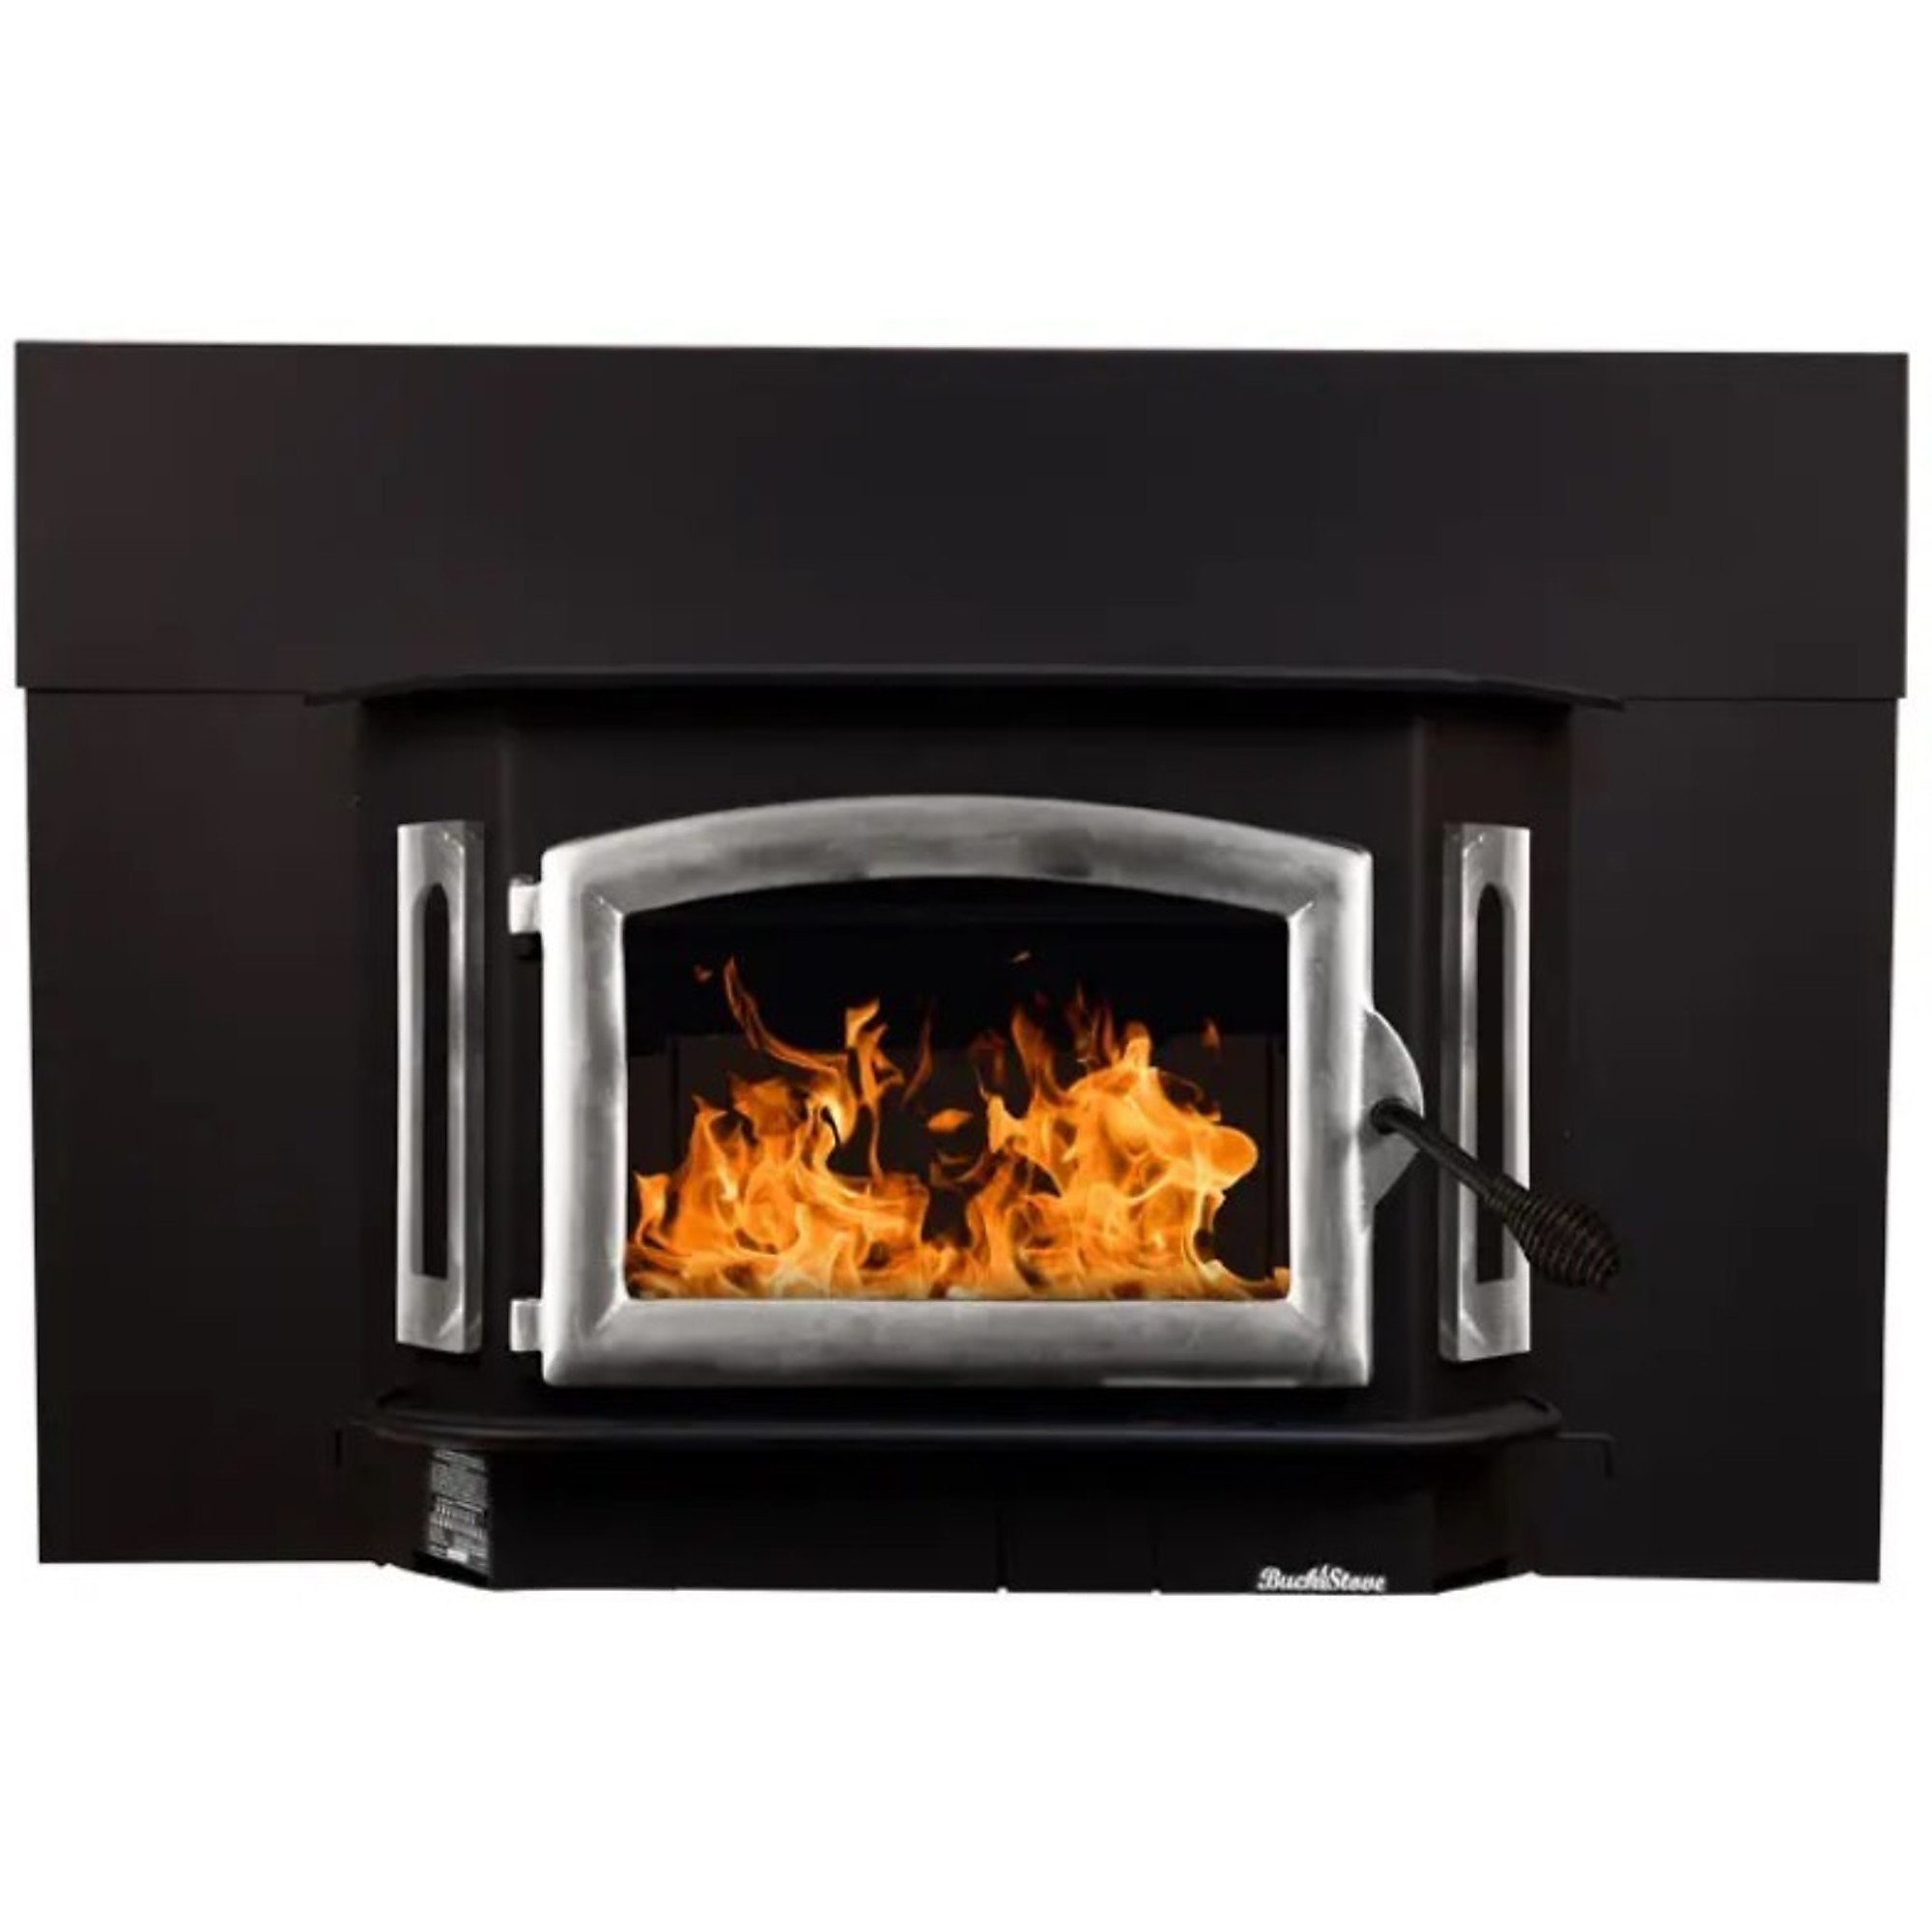 Buck, Wood Burning Insert with Pewter Door and Blower, Heat Output 59500 Btu/hour, Heating Capability 2700 ftÂ², Model FP 81PSI